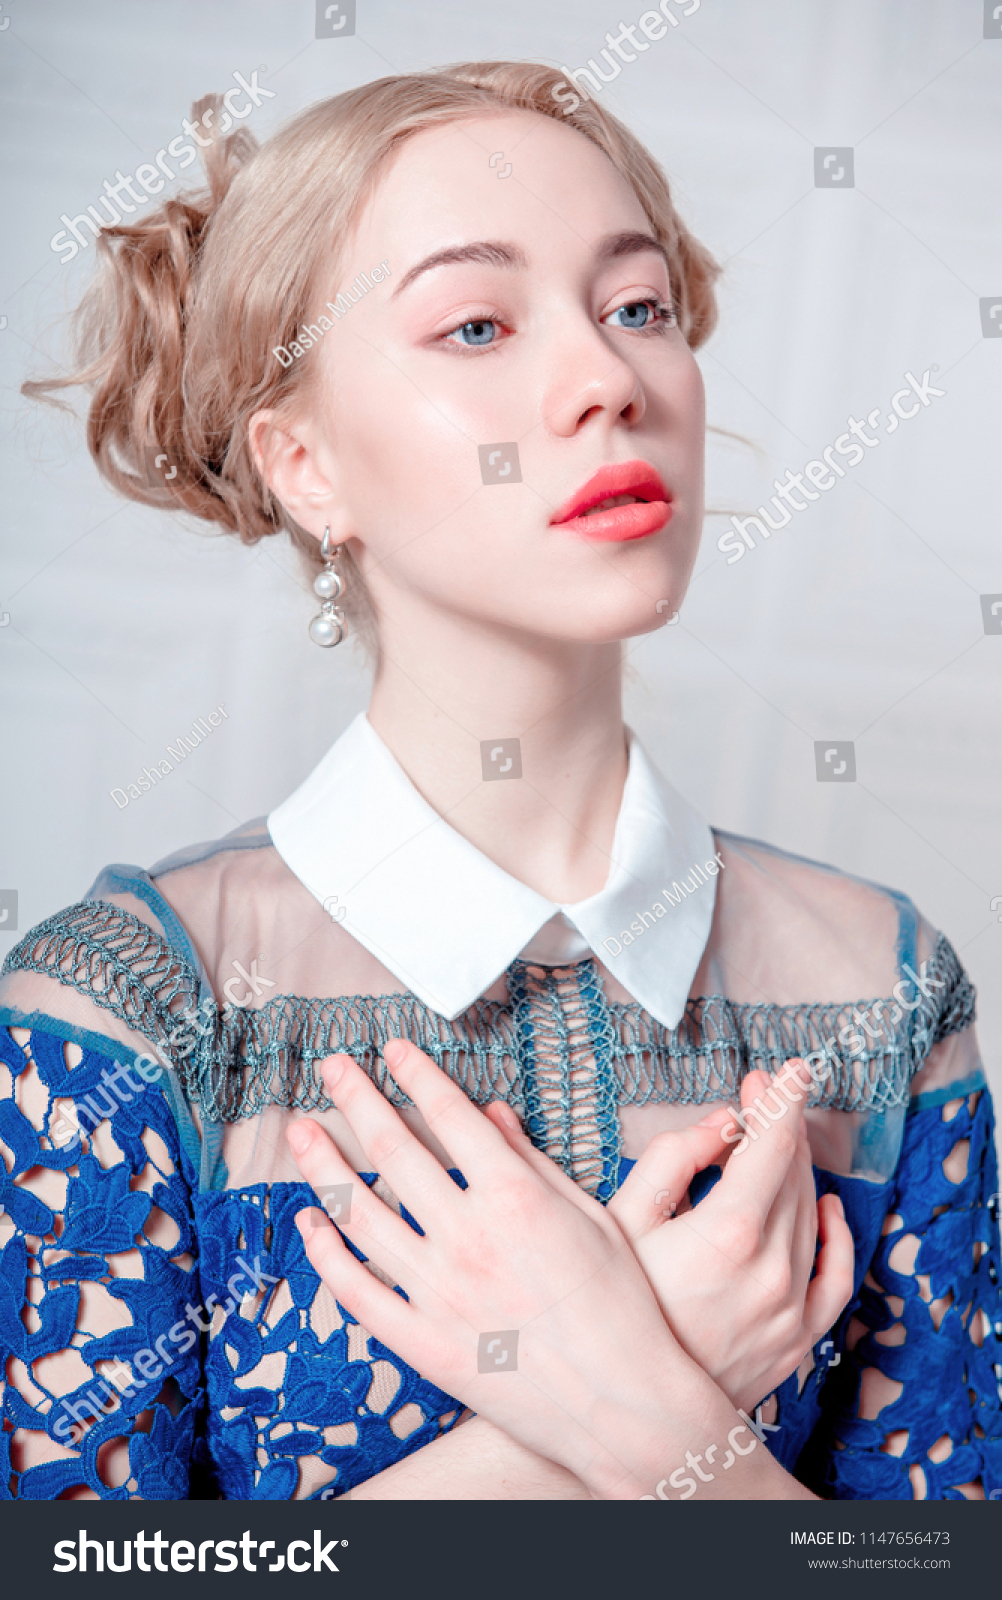 Cute young woman in navy blue dress holding bird cage, spring tender fashion studio shot #1147656473